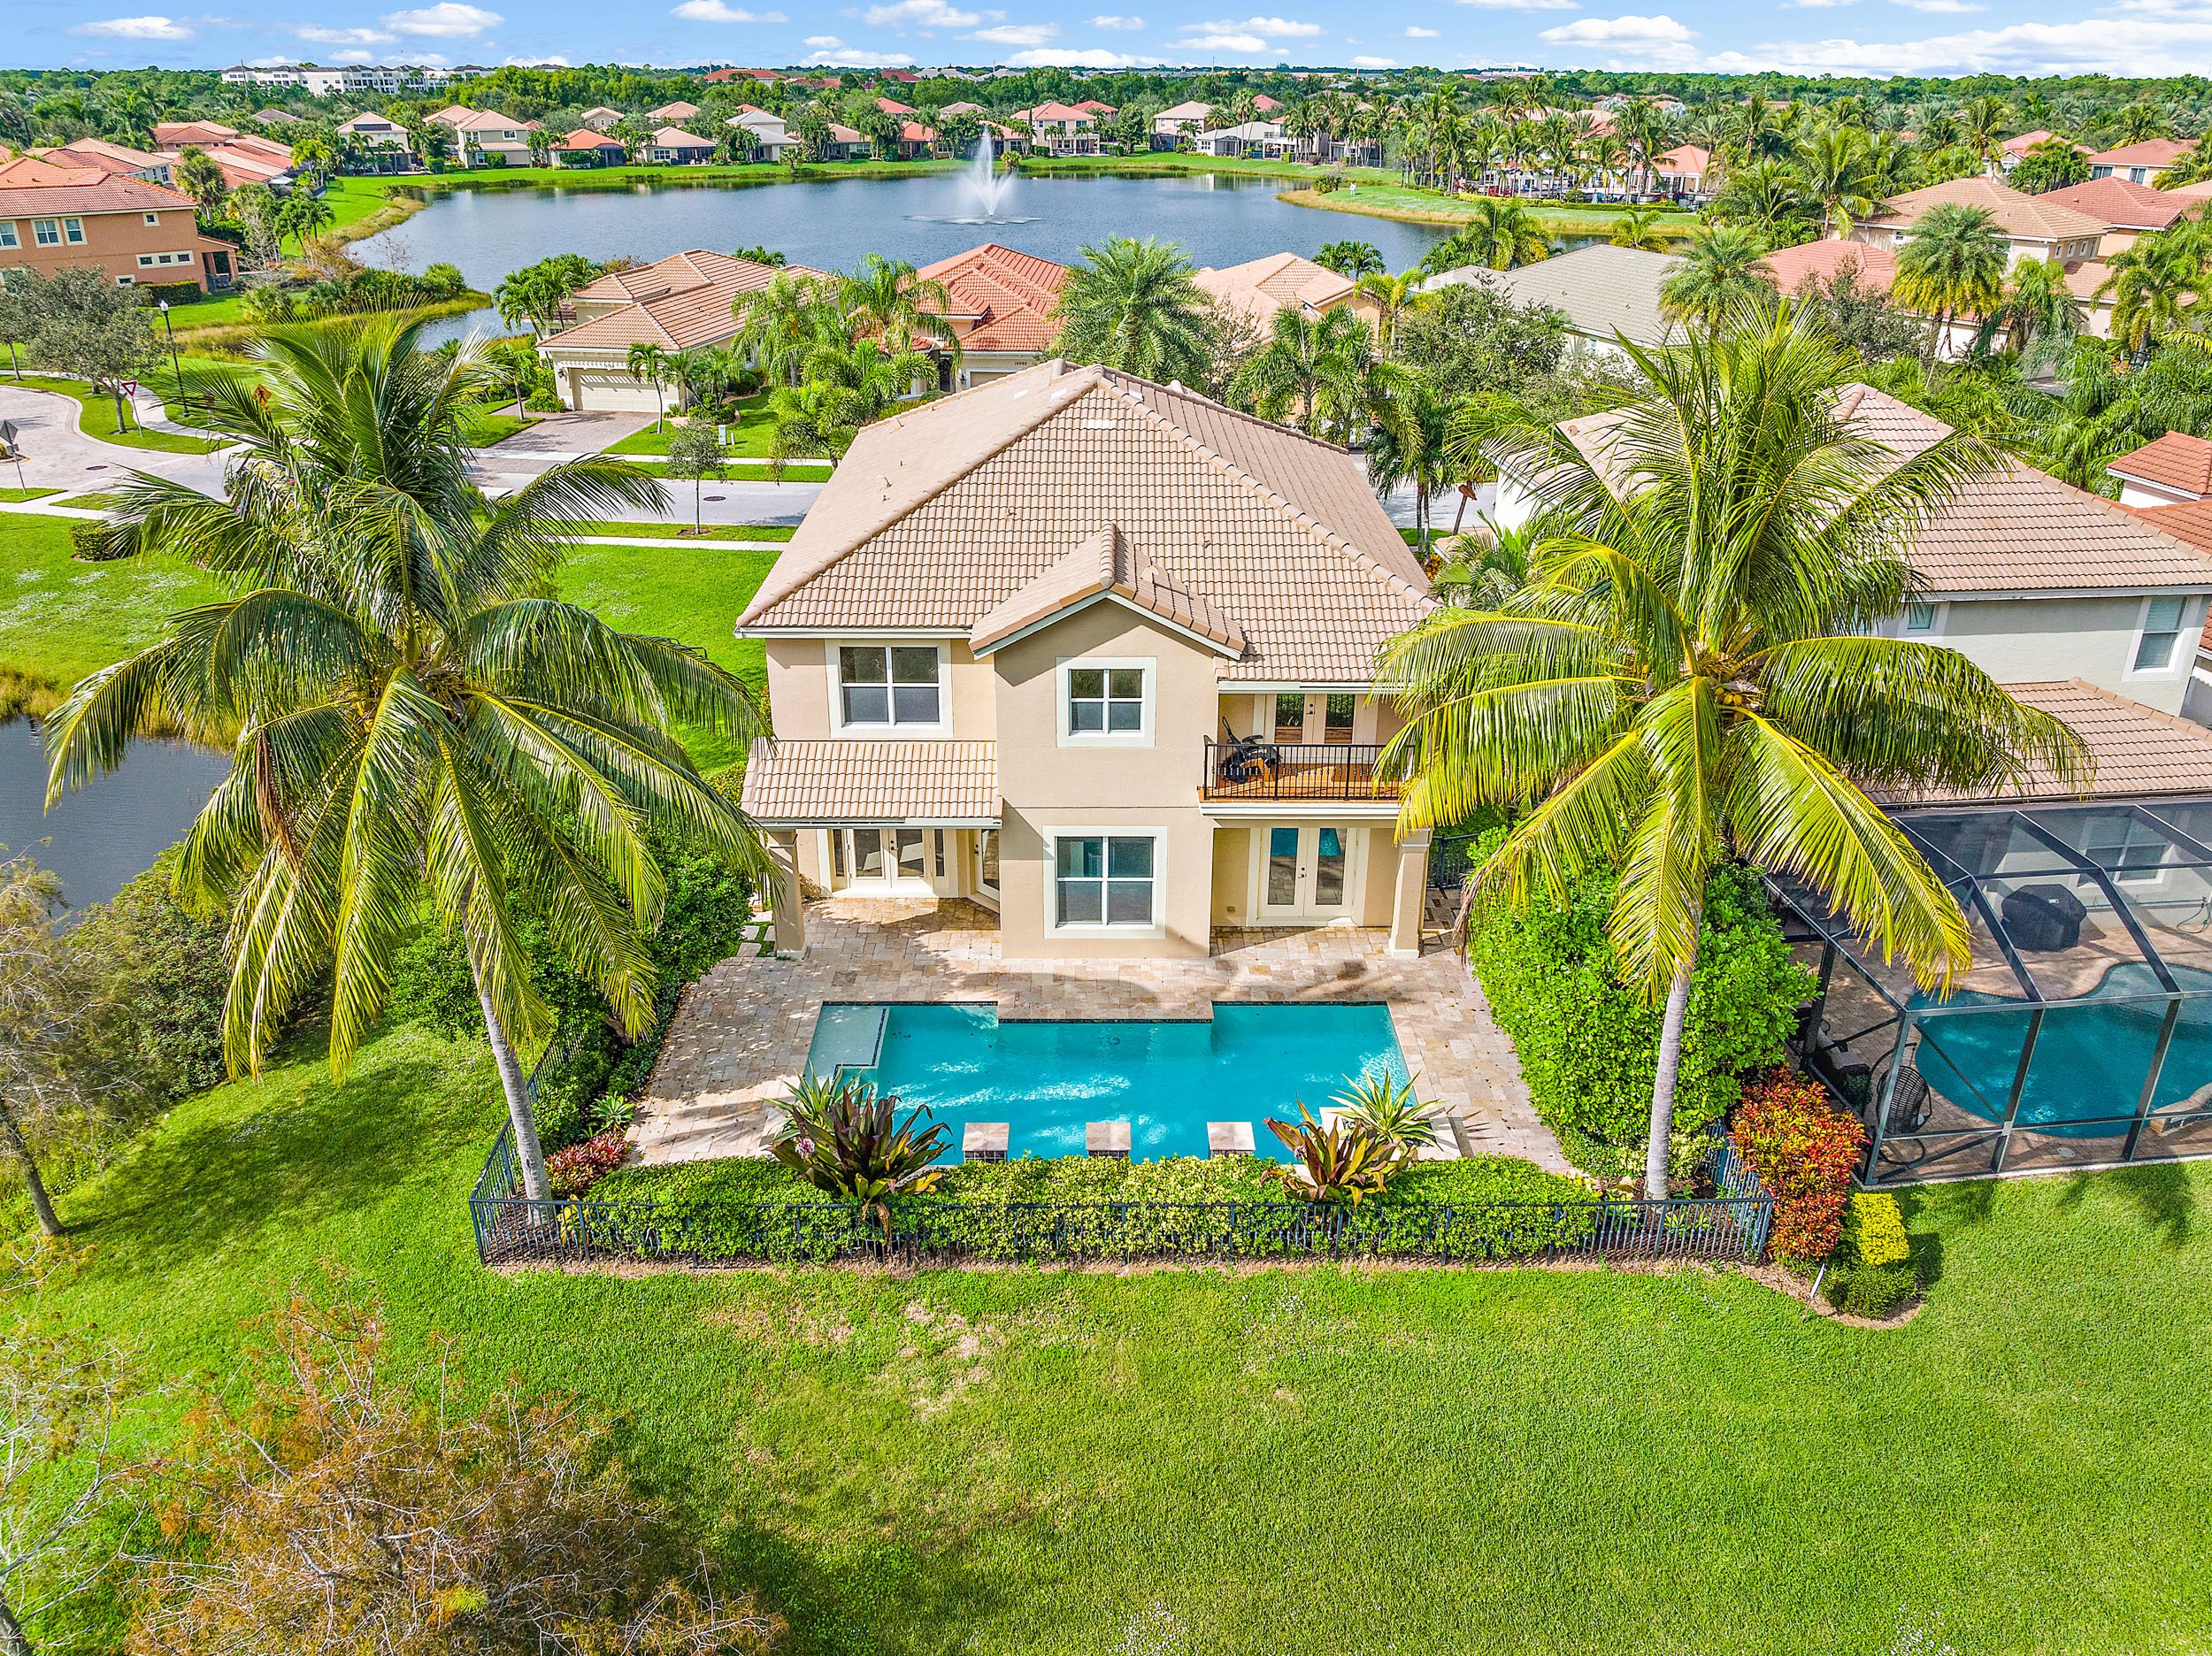 pool home in south florida will sell quickly